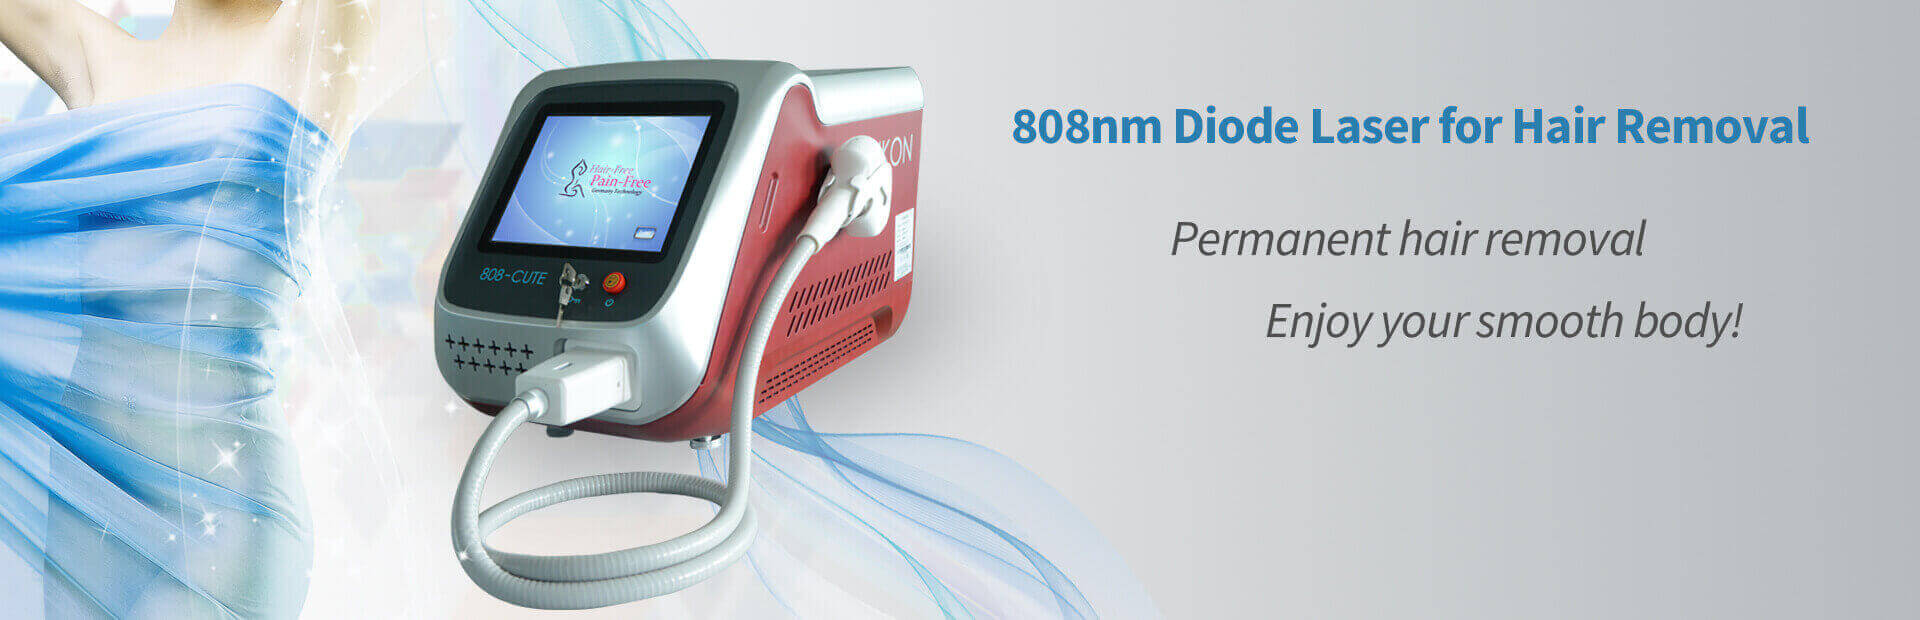 808Cute 1200w high power 808nm diode laser micro channel for permanent hair removal machine